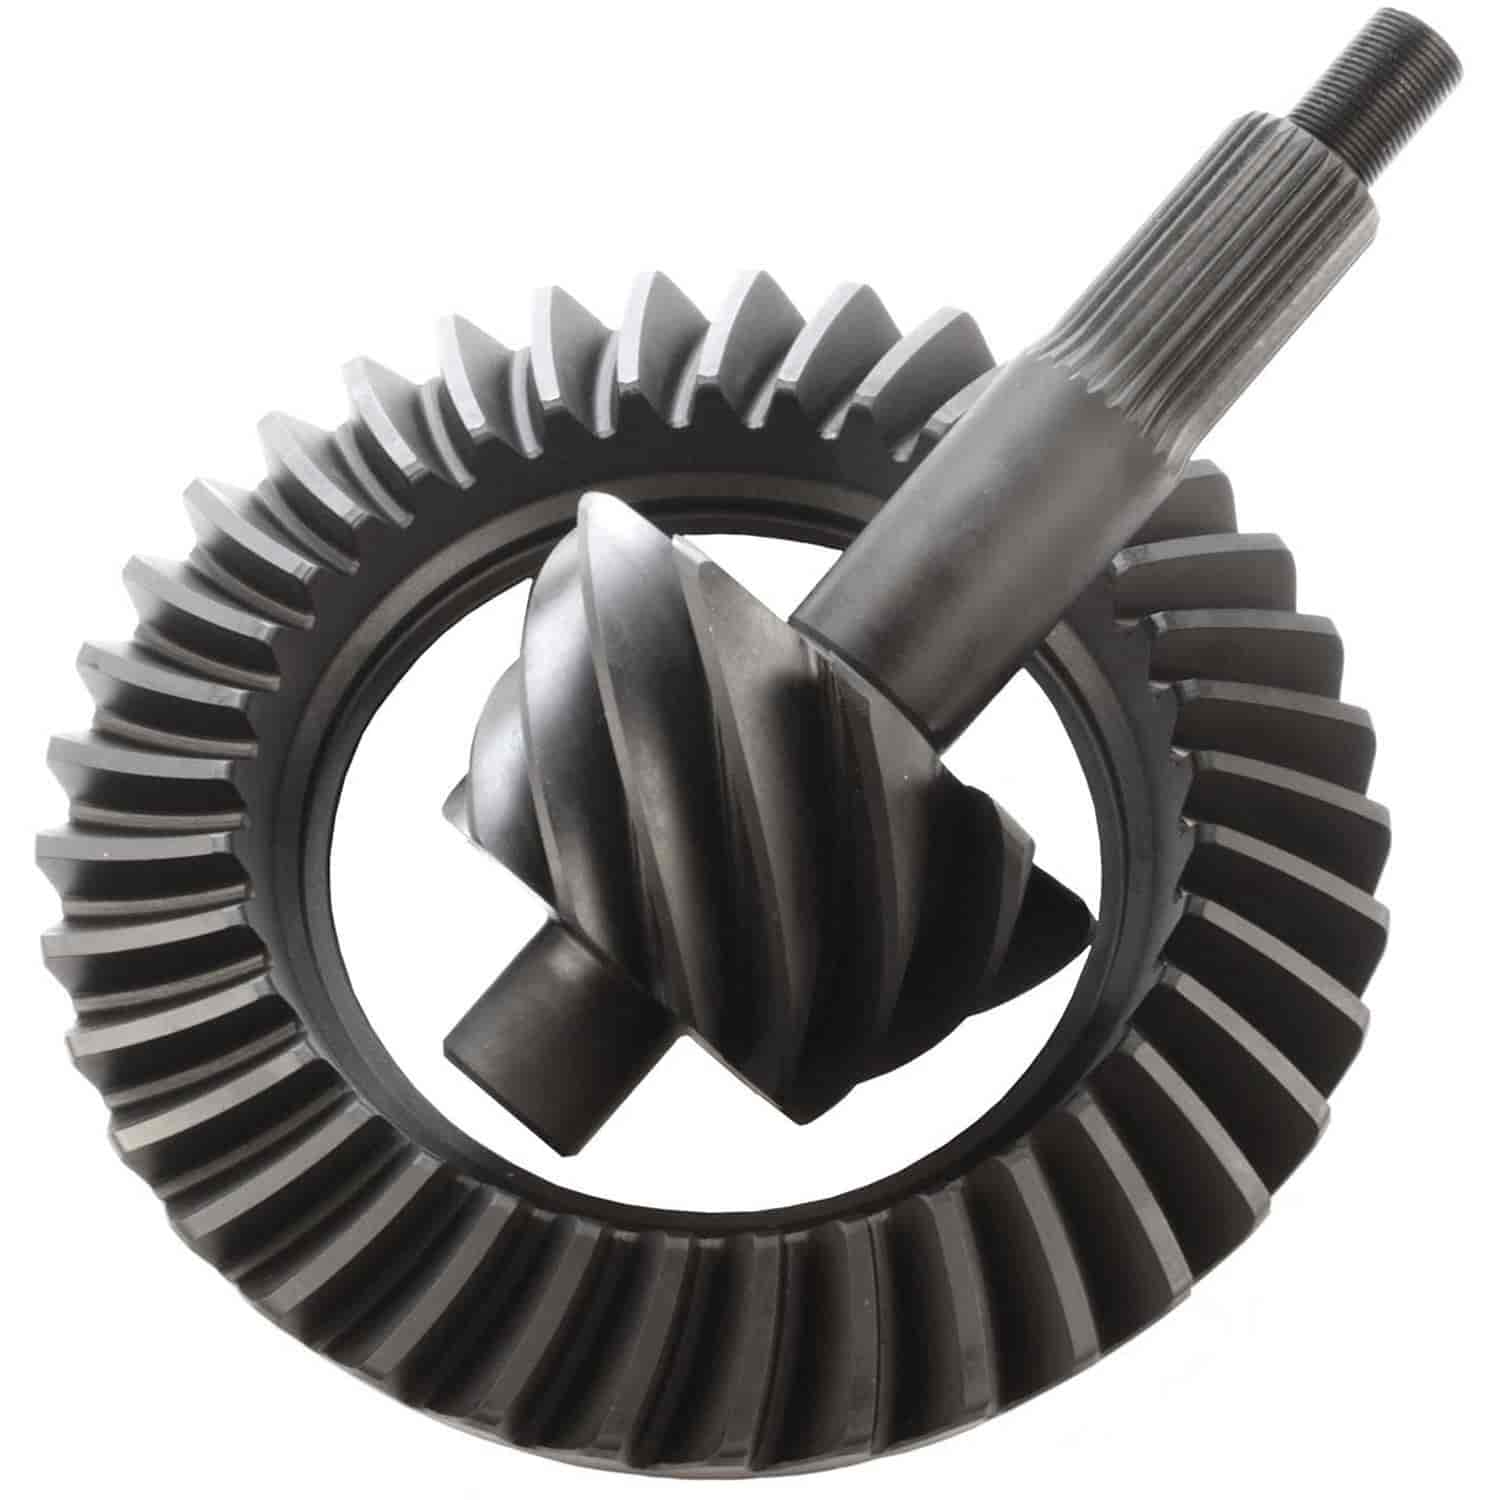 Excel Ring & Pinion Gear Set Ford 9" Ratio: 5.14